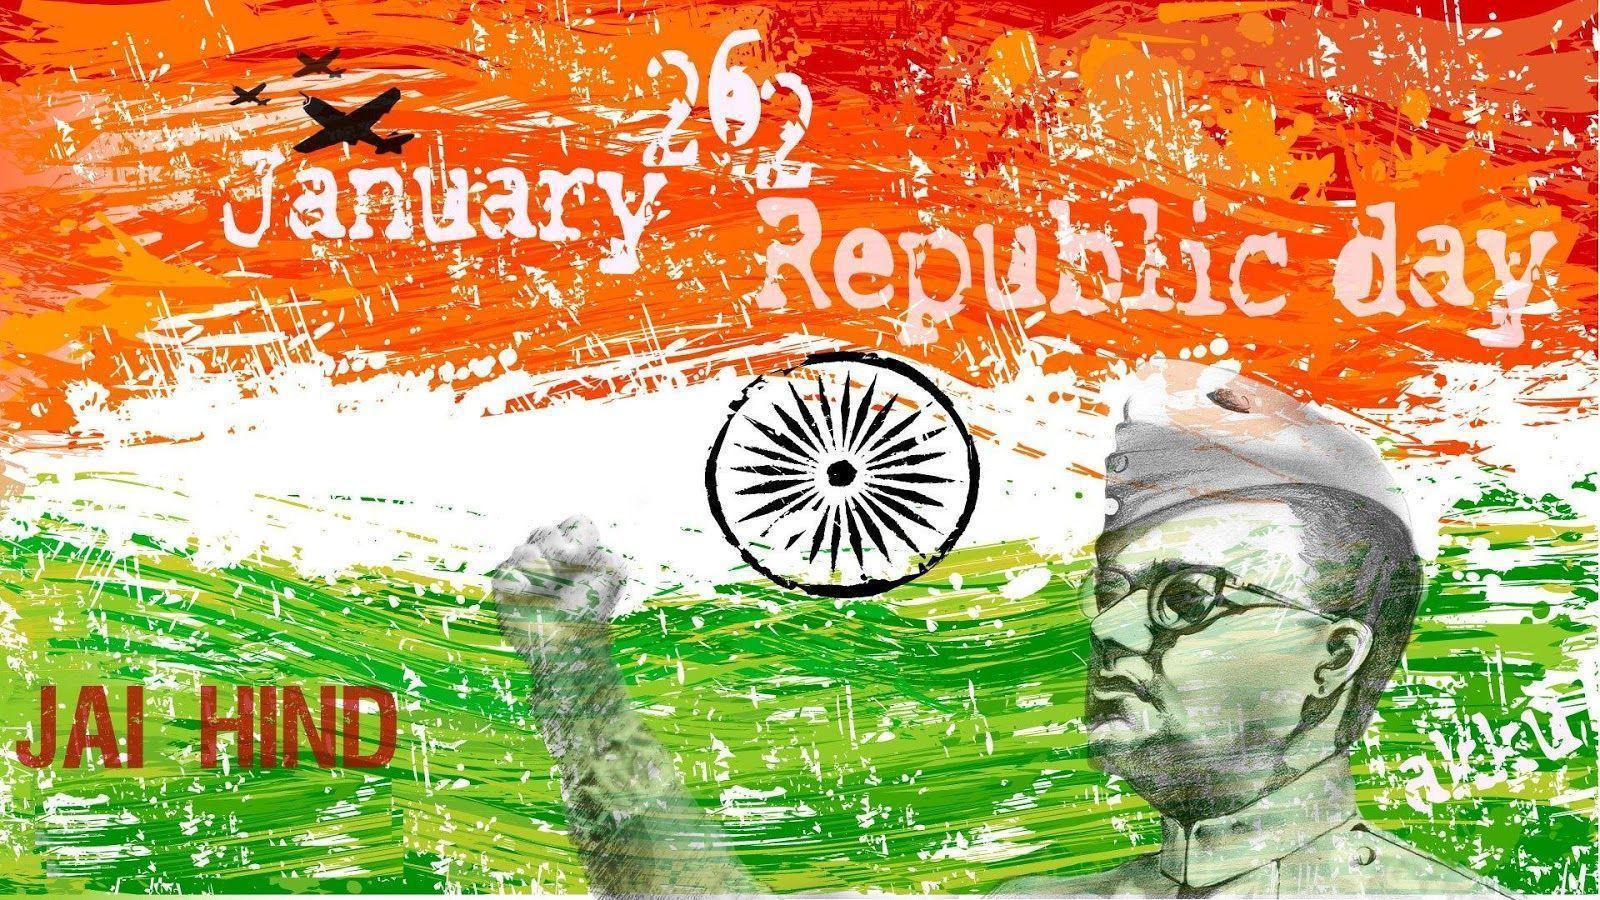 Republic day Indian Flag Image, Pictures, Wallpapers for Facebook